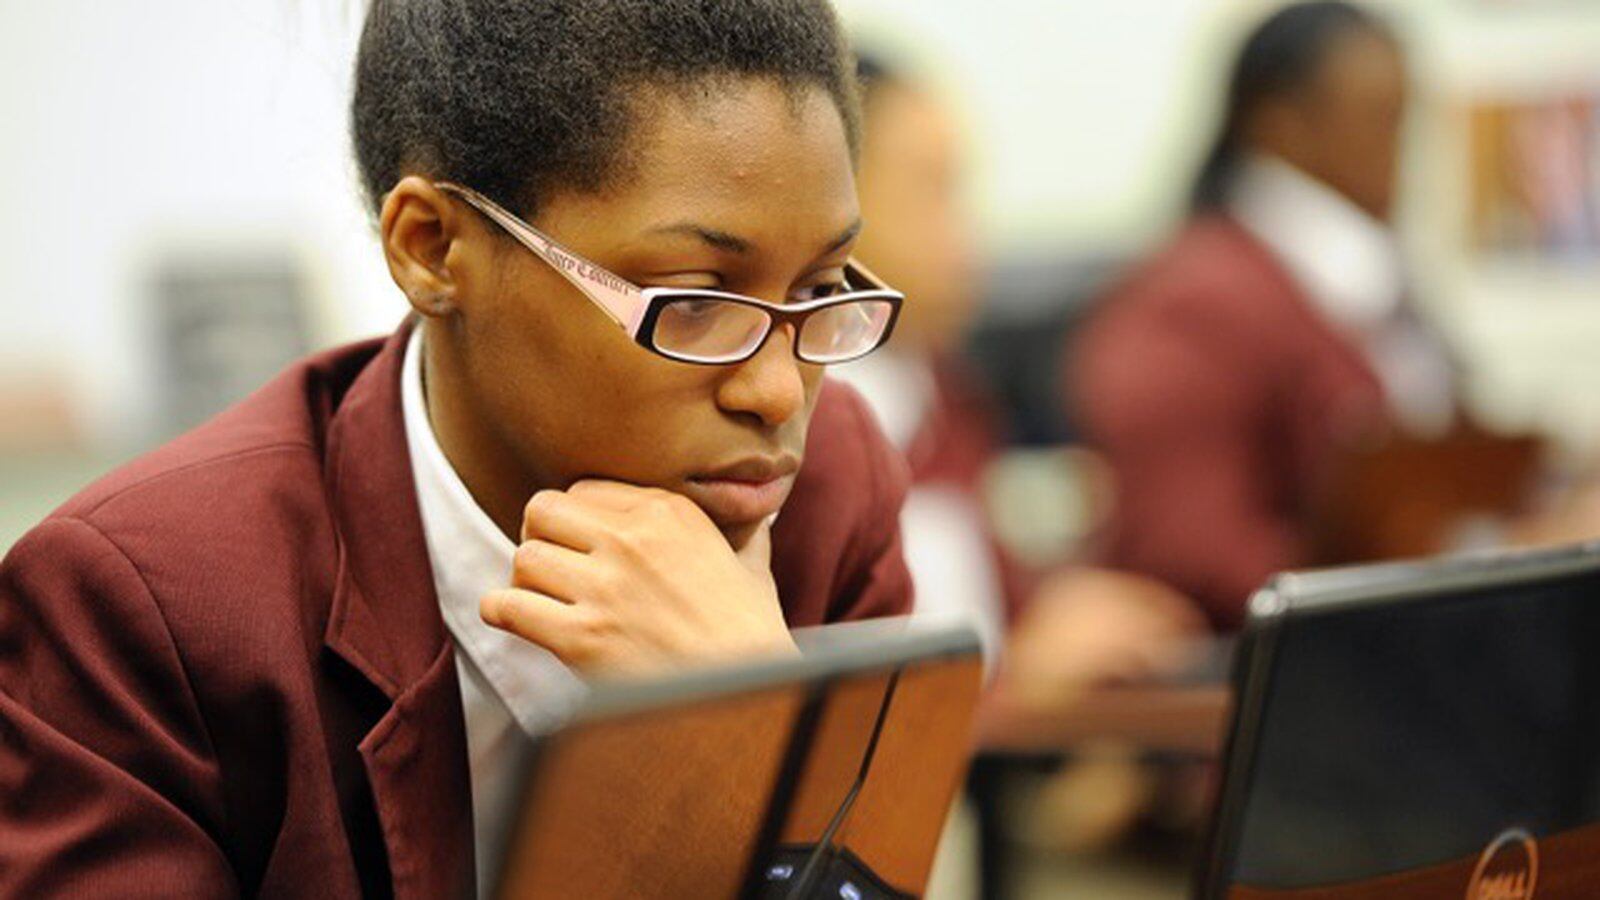 Kayla Davis works on a college admissions form. Stock photos for Chalkbeat stories. Photos made at Tindley Accelerated School, 3960 Meadows Dr, Indianapolis, Indiana.  Nov. 22, 2013. (Photo by Alan Petersime)